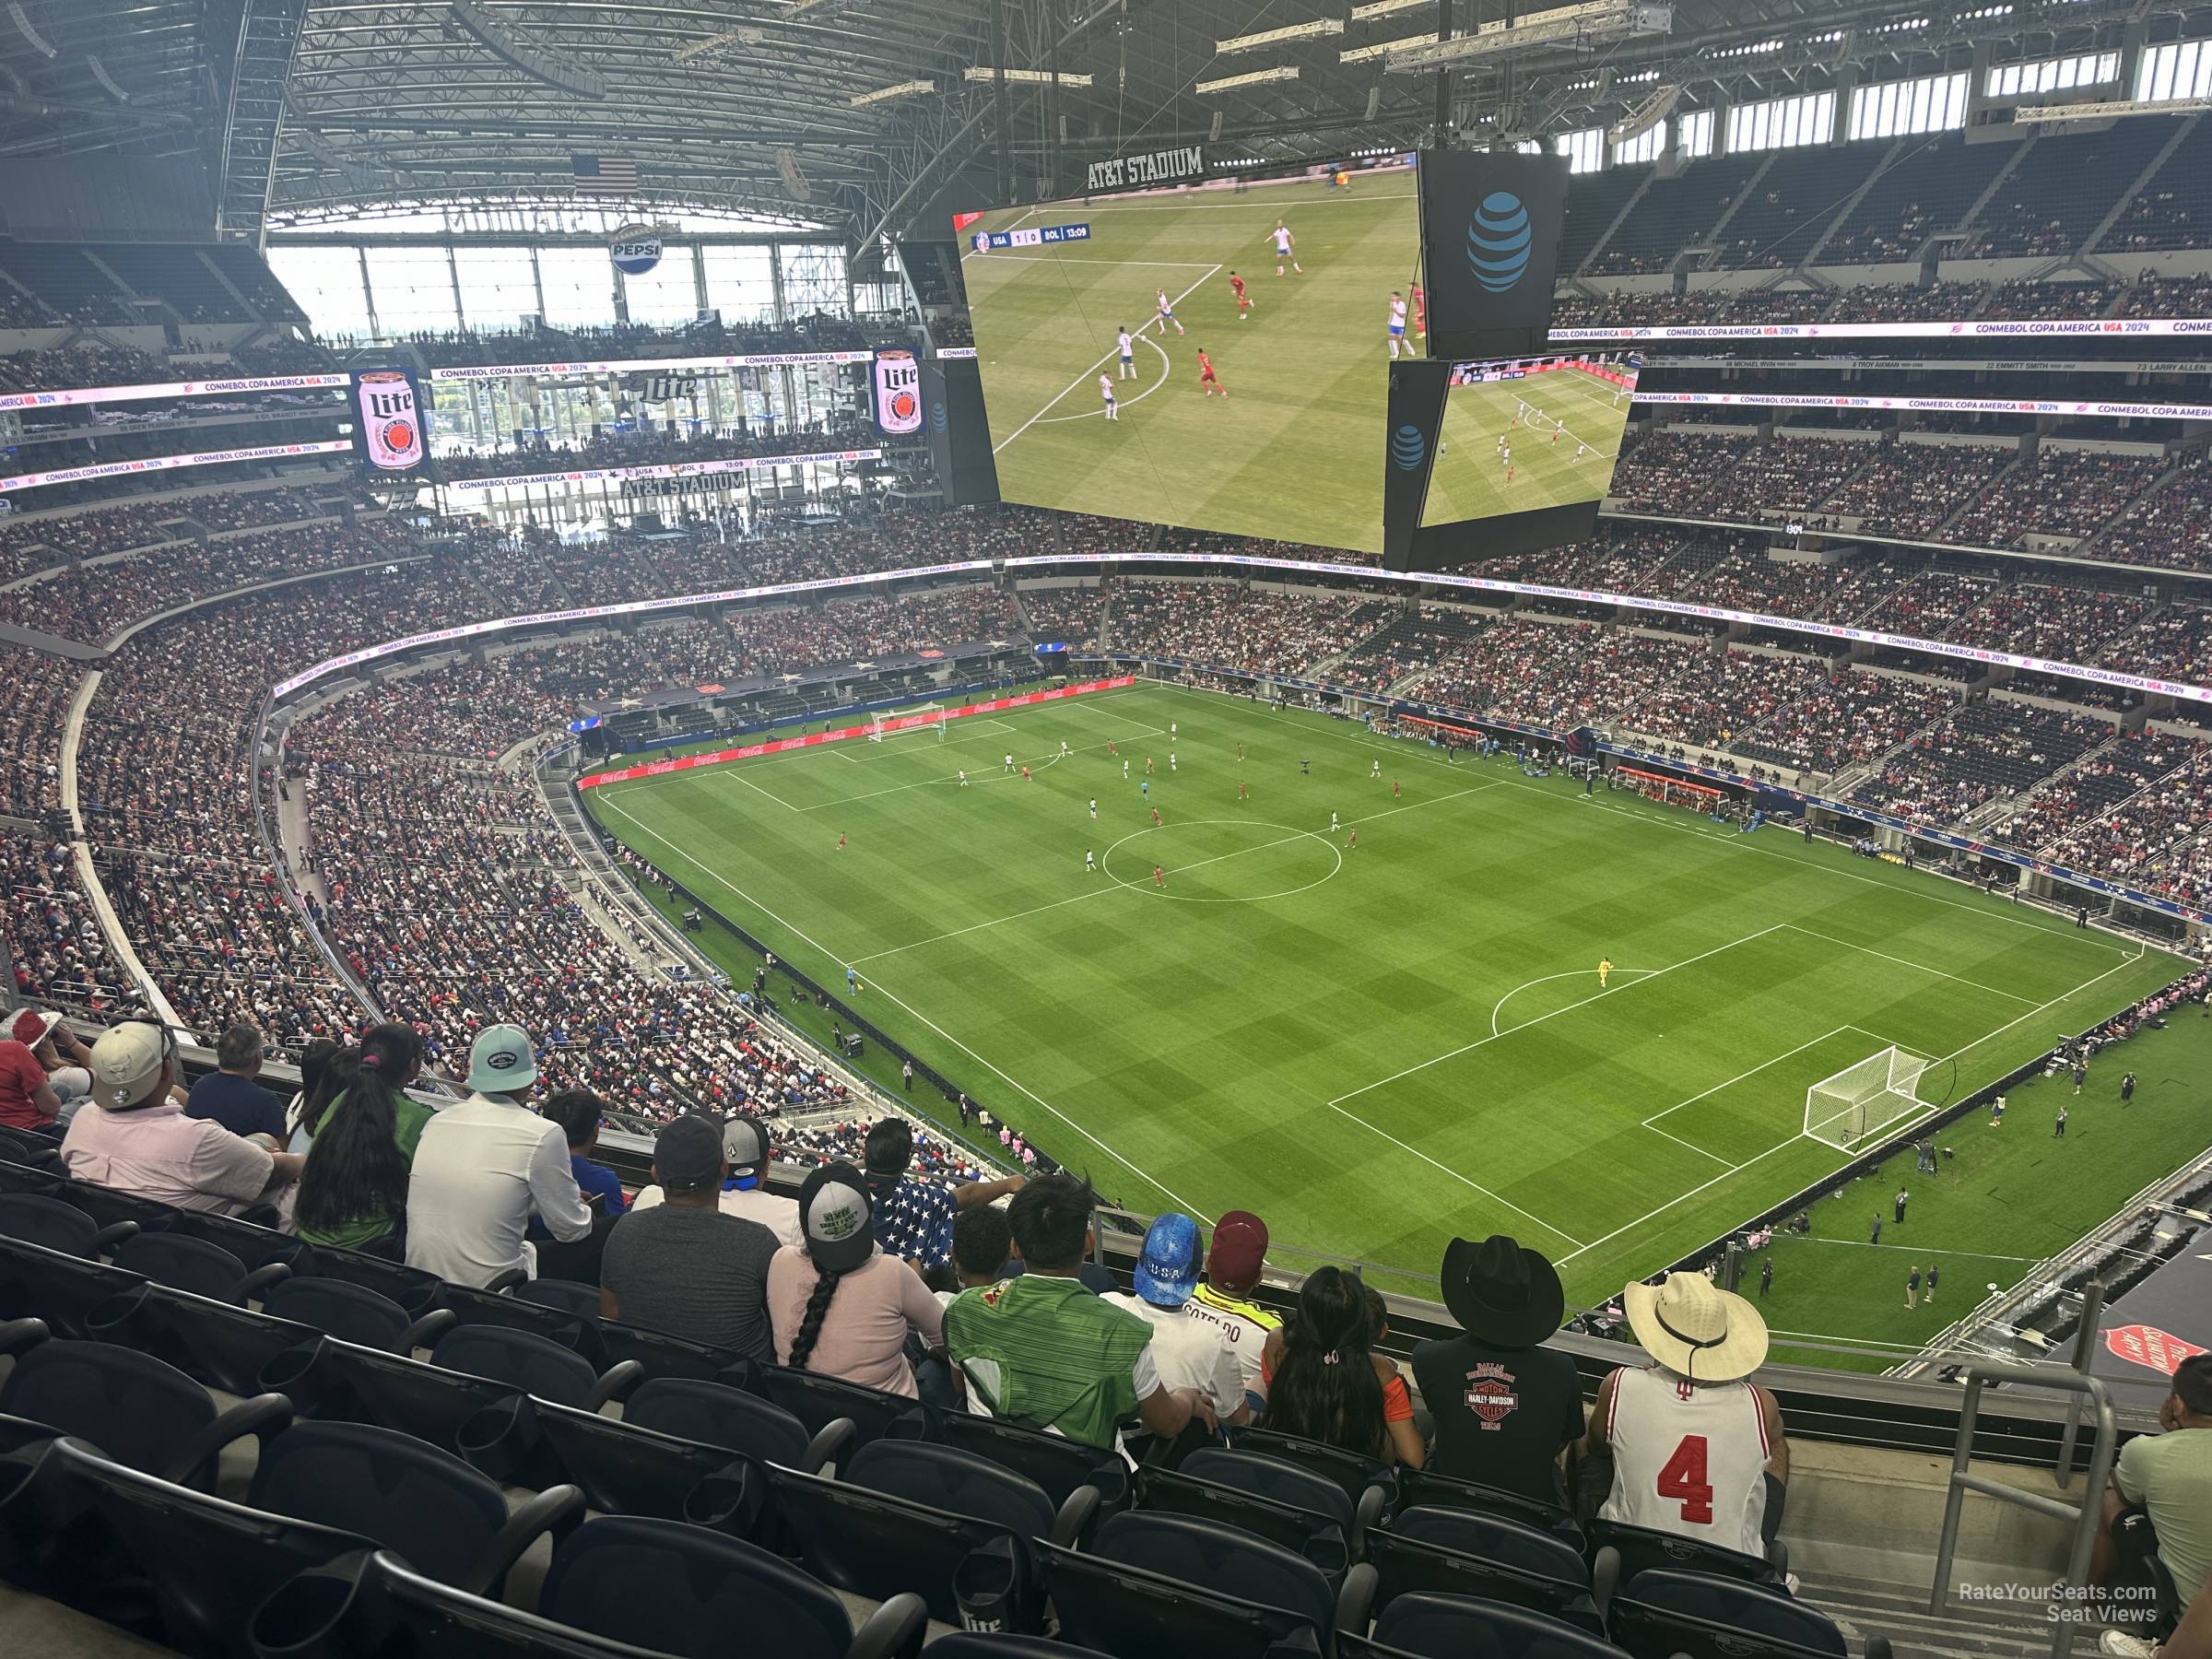 section 405, row 5 seat view  for soccer - at&t stadium (cowboys stadium)